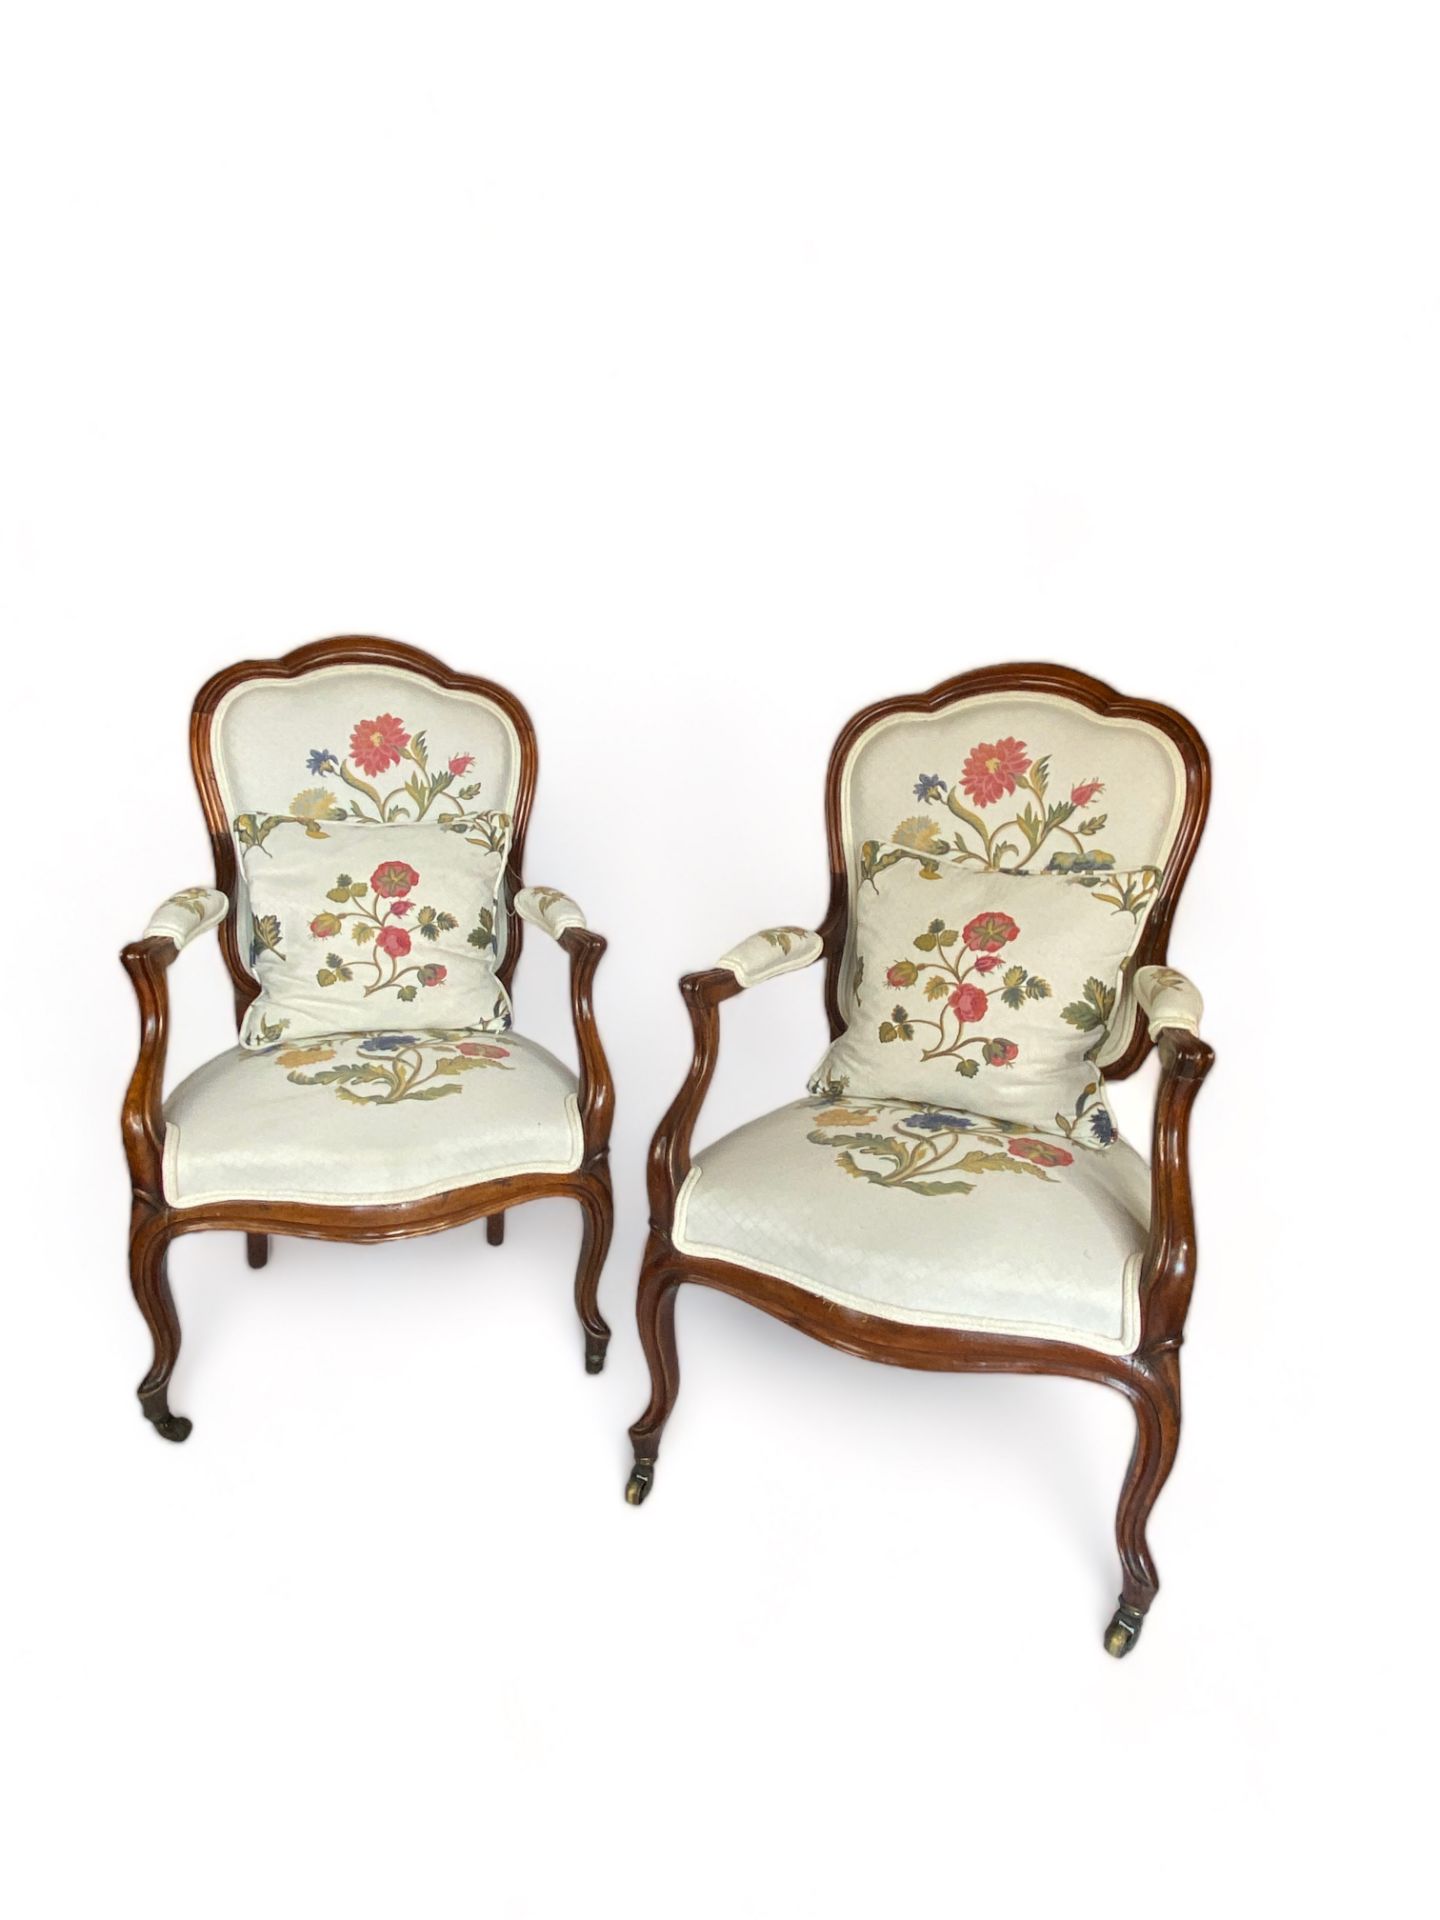 A pair of 19th century French Louis XV style mahogany cream floral upholstered fauteuils